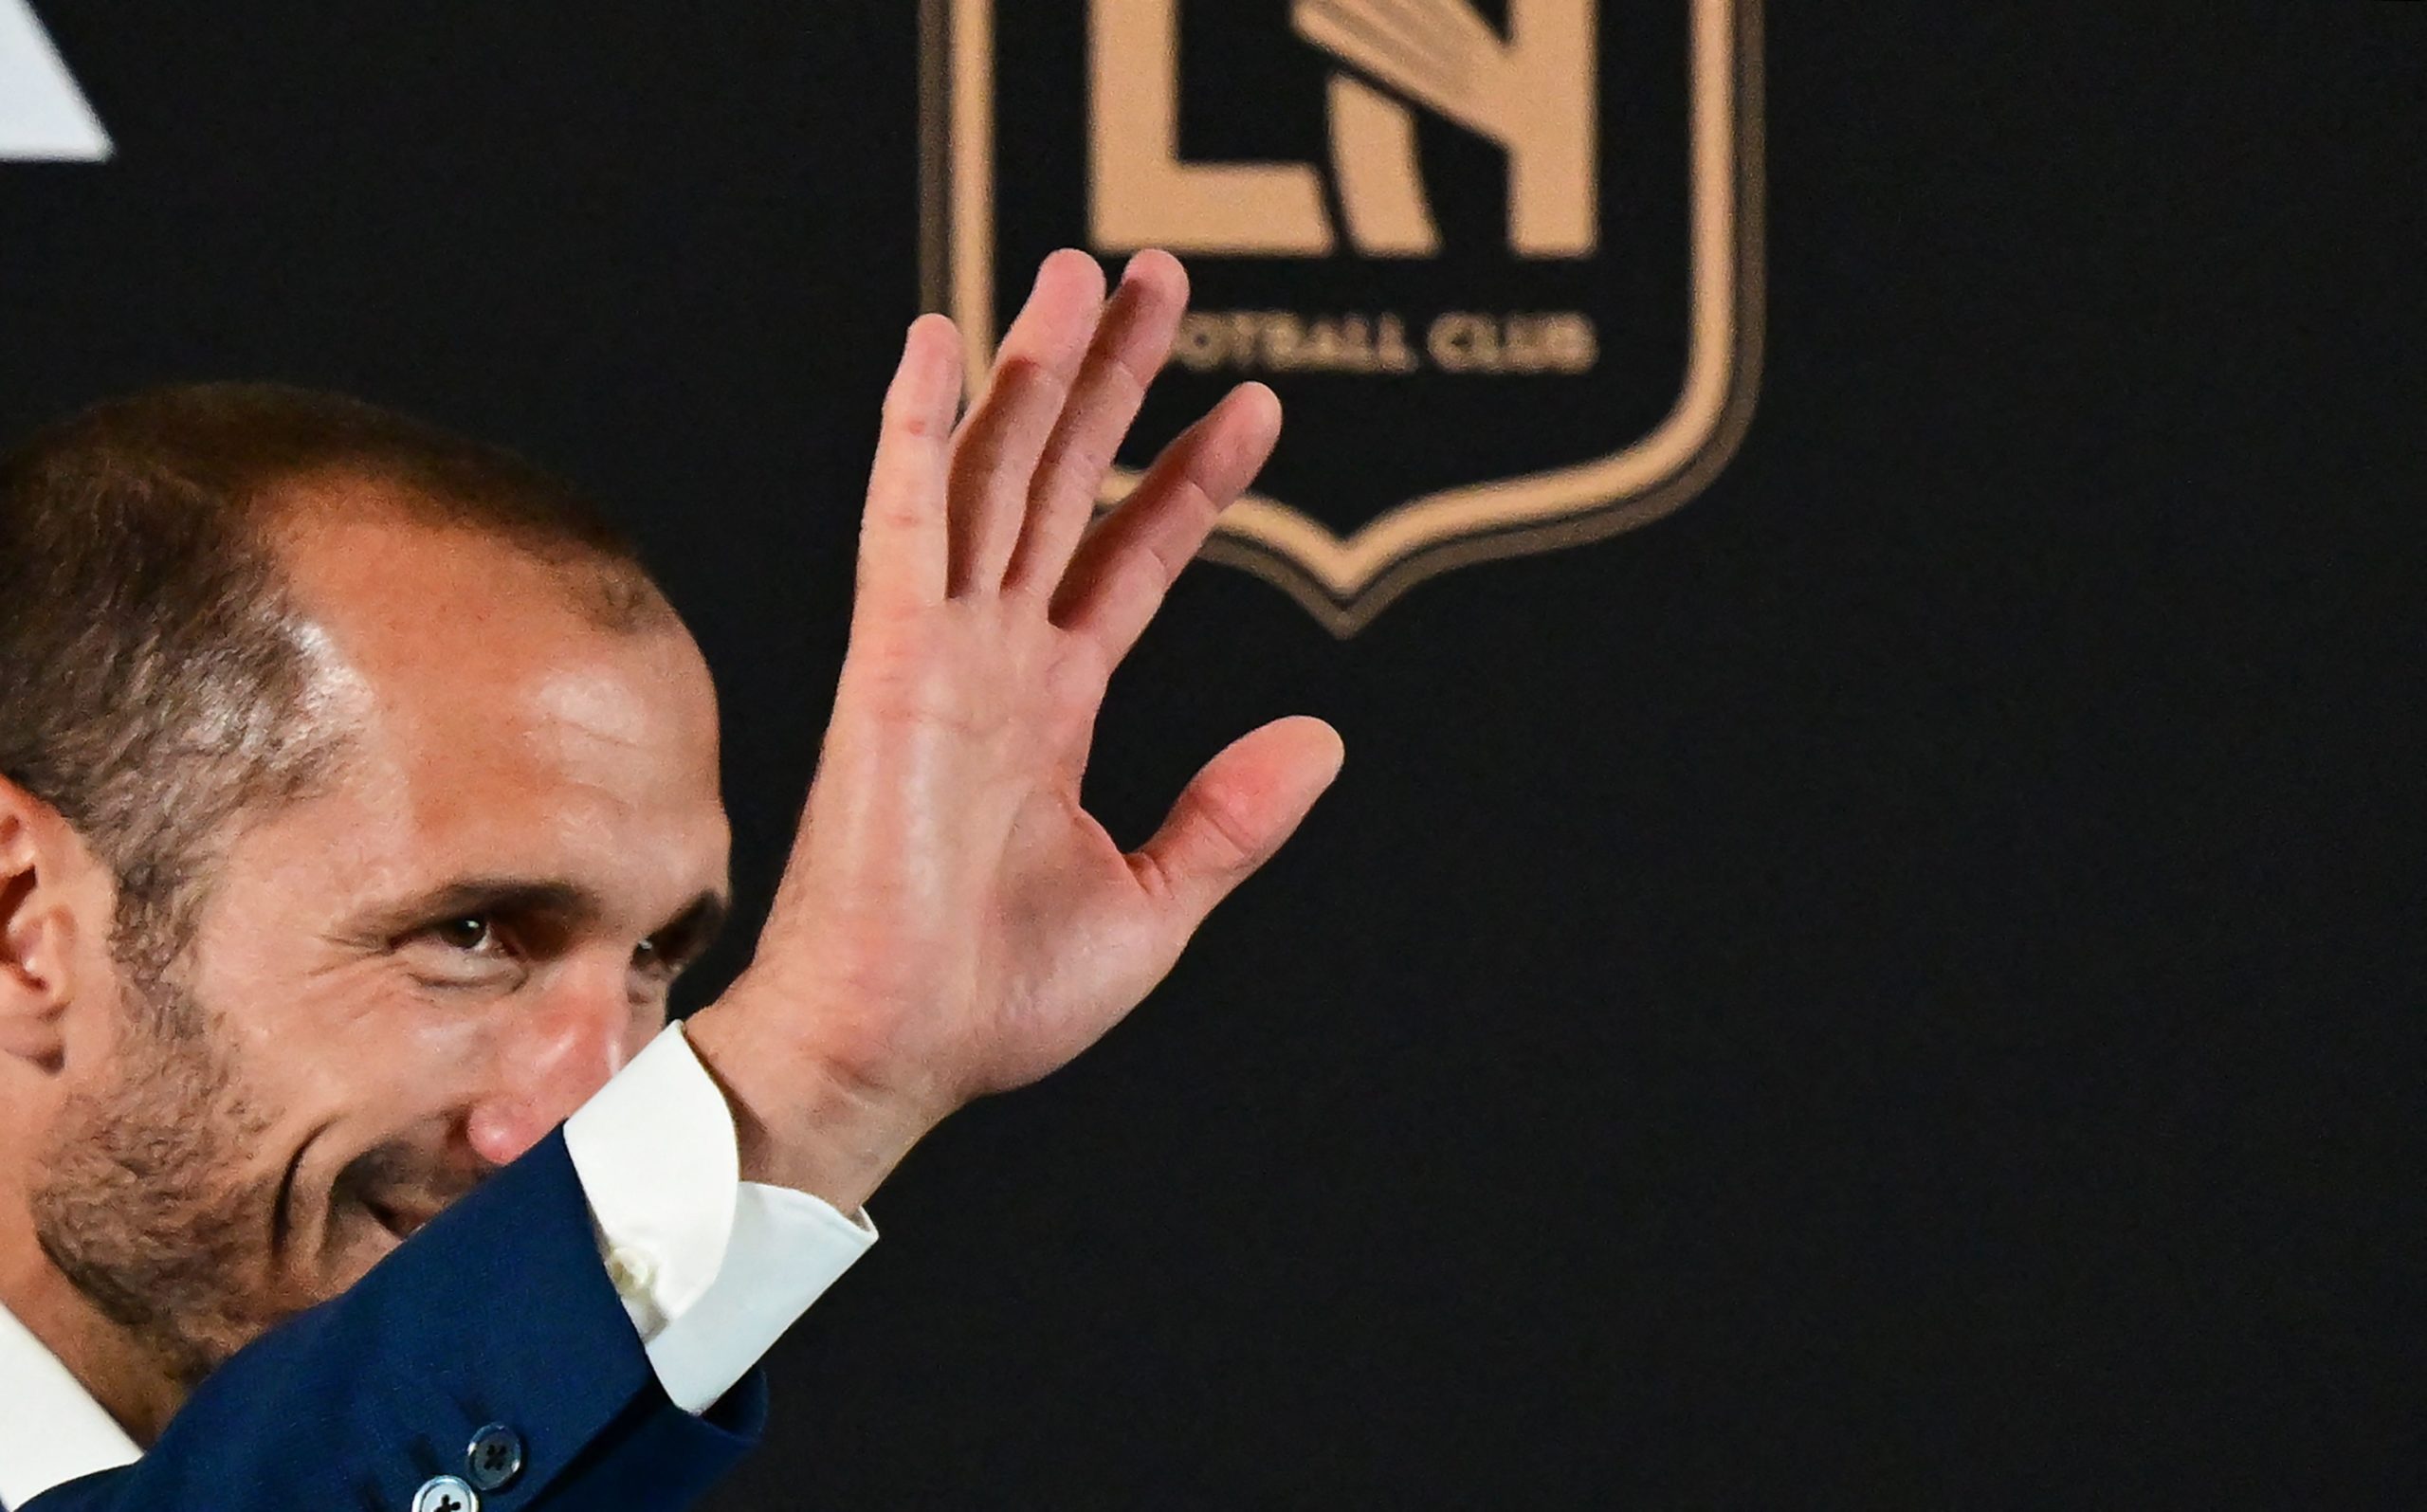 Giorgio Chiellini waves as he arrives for a press conference introducing his arrival to Major League Soccer club Los Angeles FC (LAFC) on June 29, 2022 in Los Angeles. - The former Juventus defender joins LAFC on July 1.  (Photo by FREDERIC J. BROWN/AFP via Getty Images)